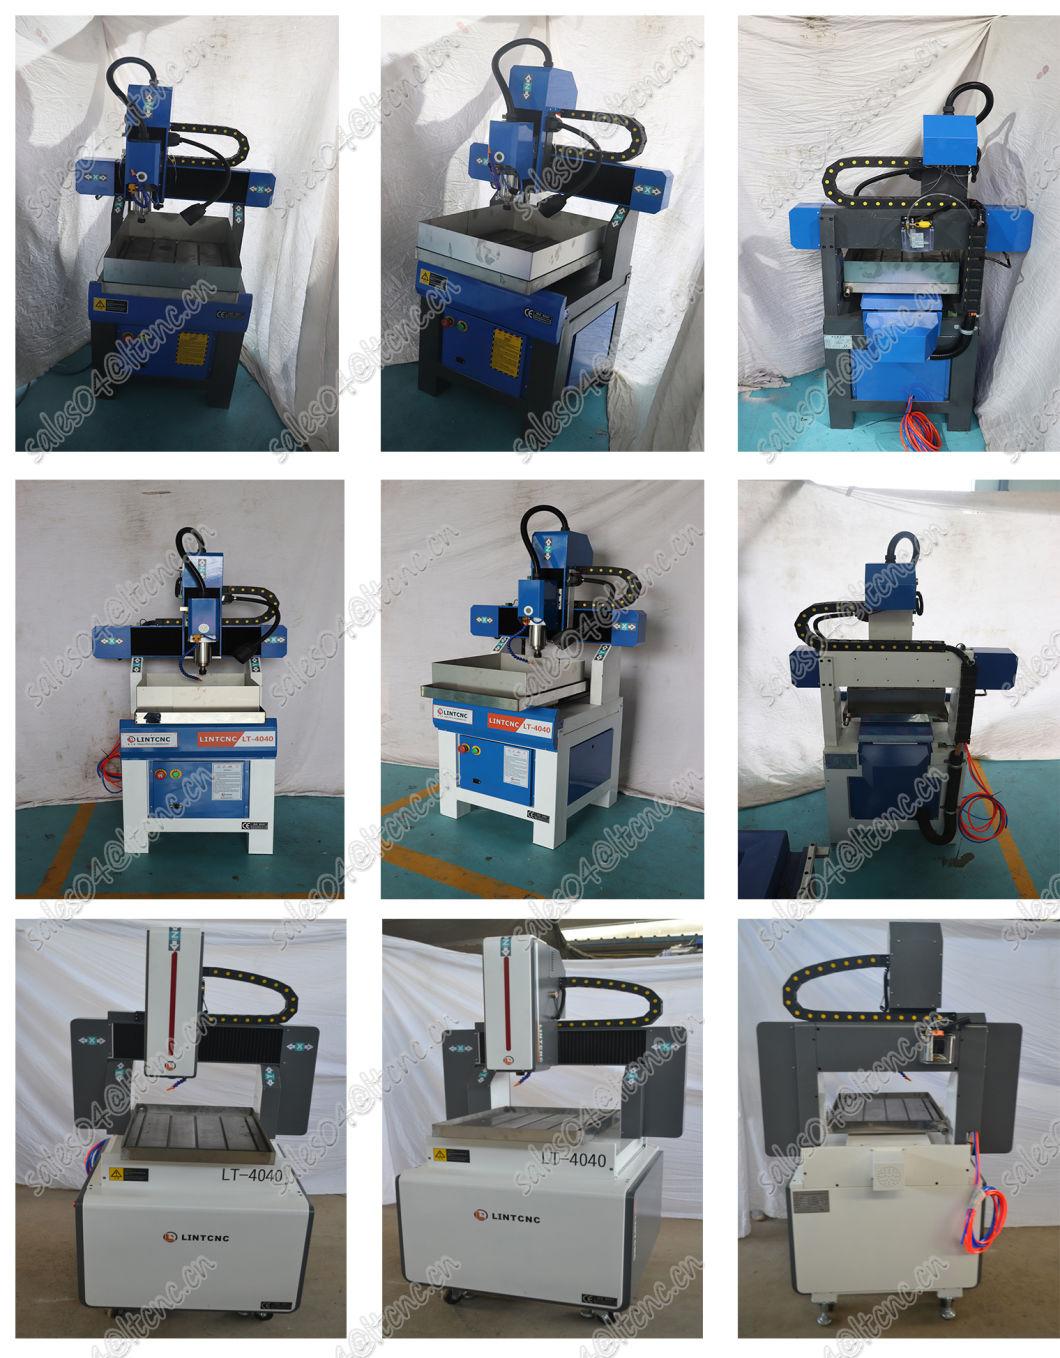 Low Price 3030 4040 6060 6090 CNC Router 3D CNC Wood Carving Machine for Metal Mold Cutting Engraving